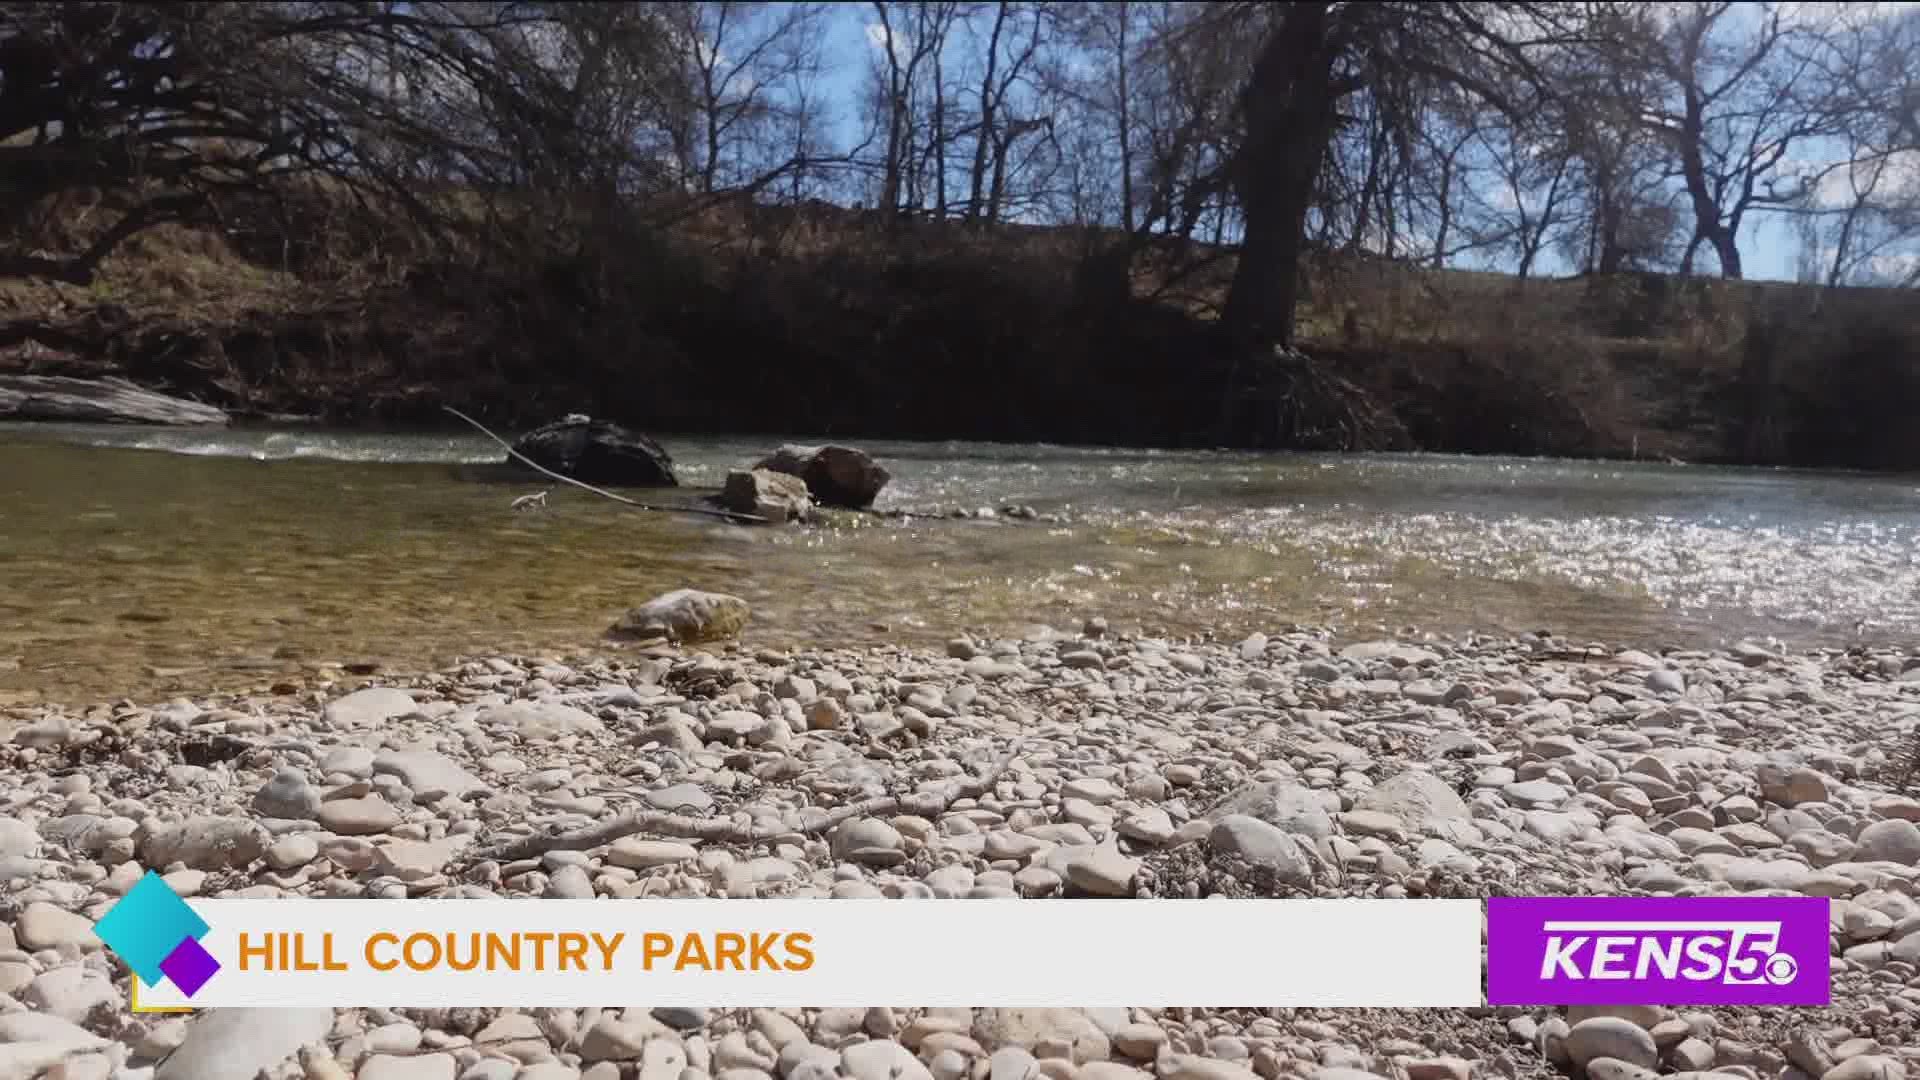 From James Kiehl Park to everything in between, Lexi shows us the top parks in the Hill Country.